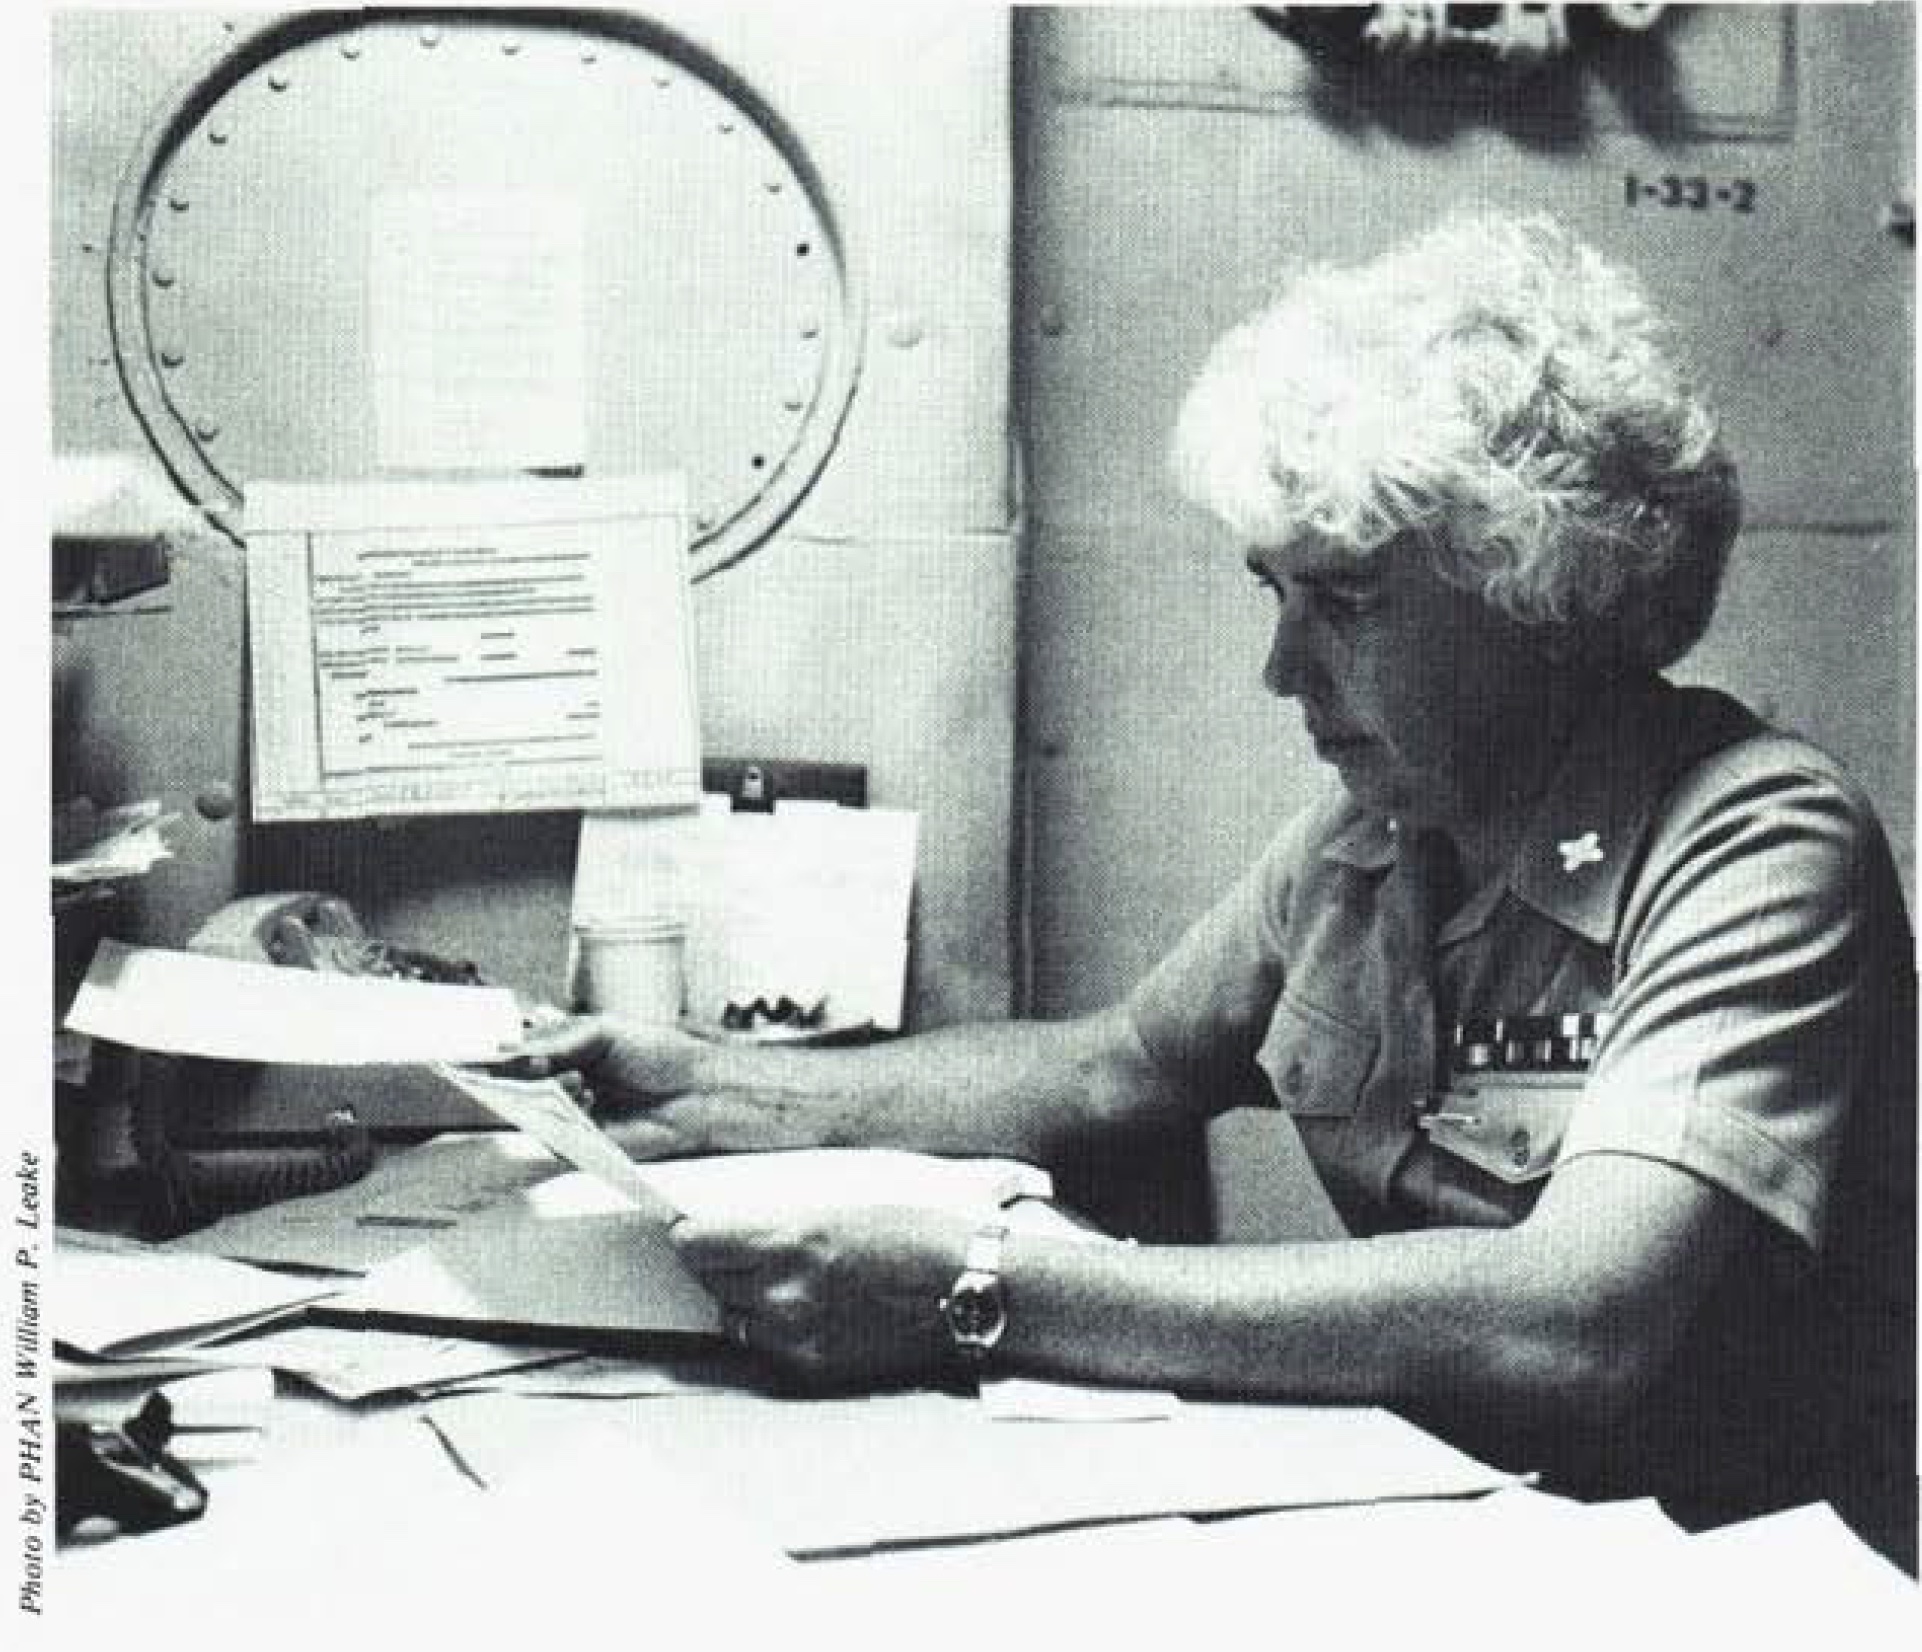 CW (Chief Warrant Officer) 02 Wilson at her desk aboard the USS Jason.